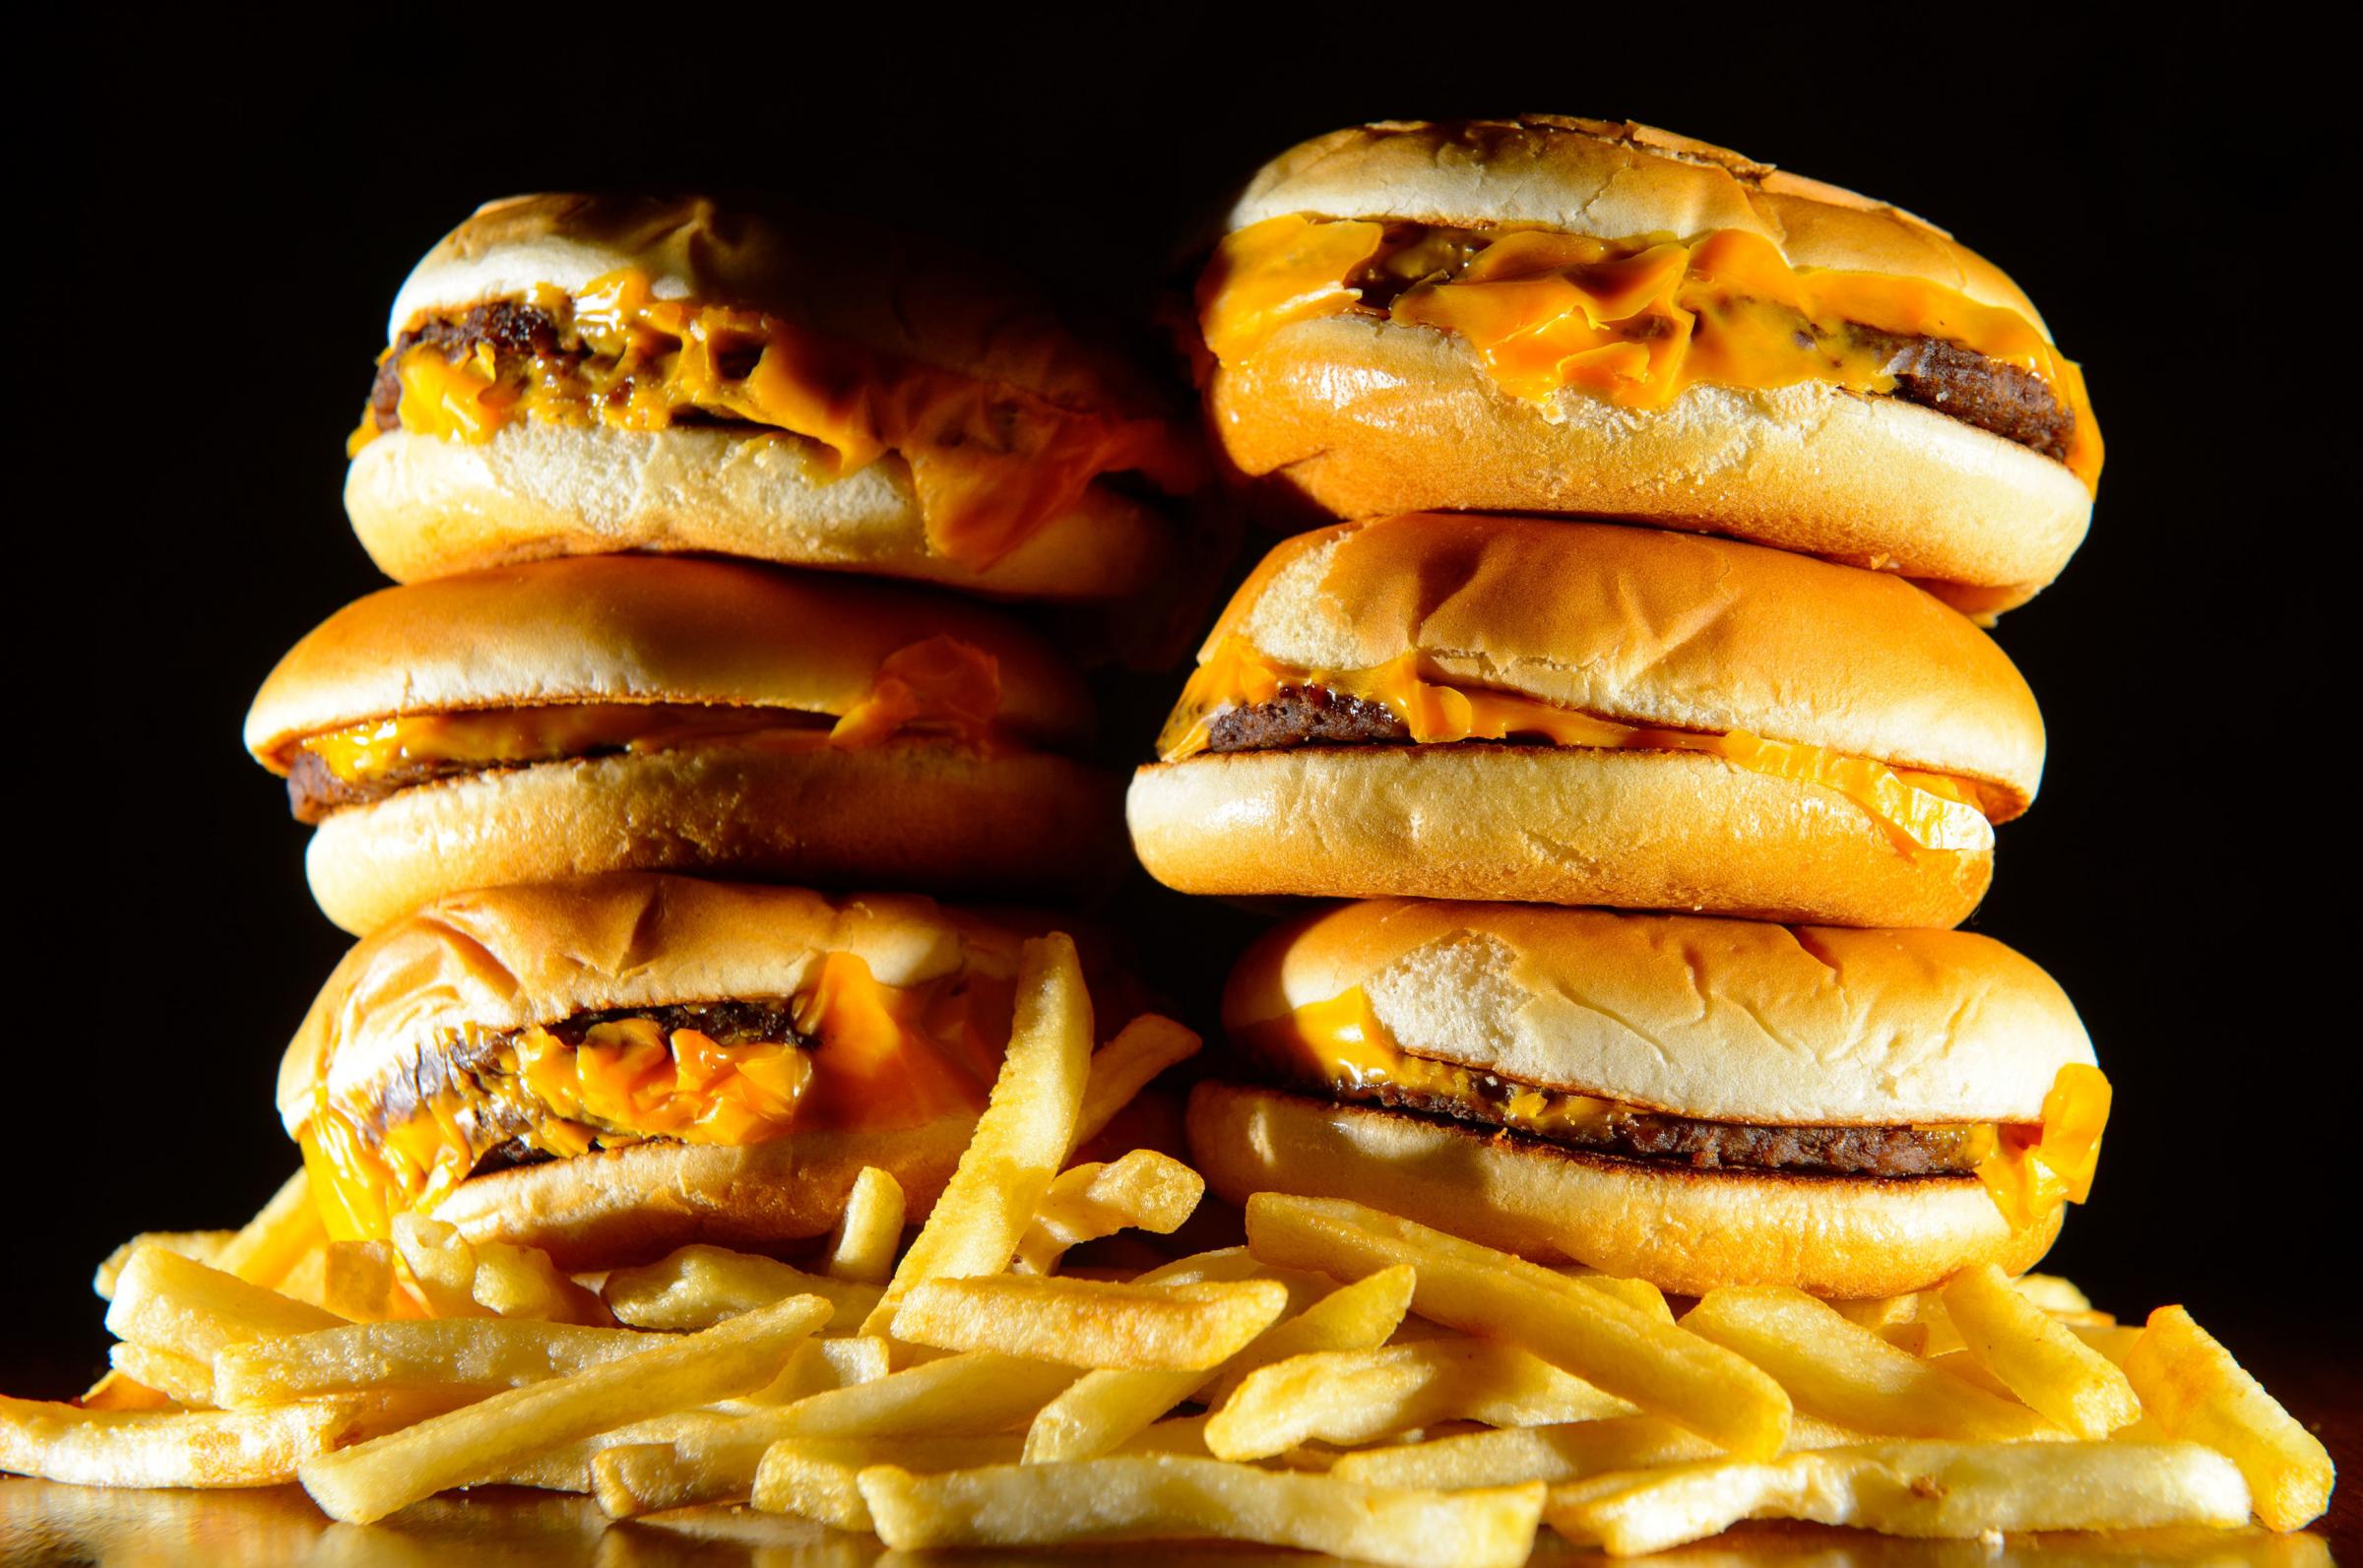 Why is there a ban on junk food ads and does it apply to Scotland?